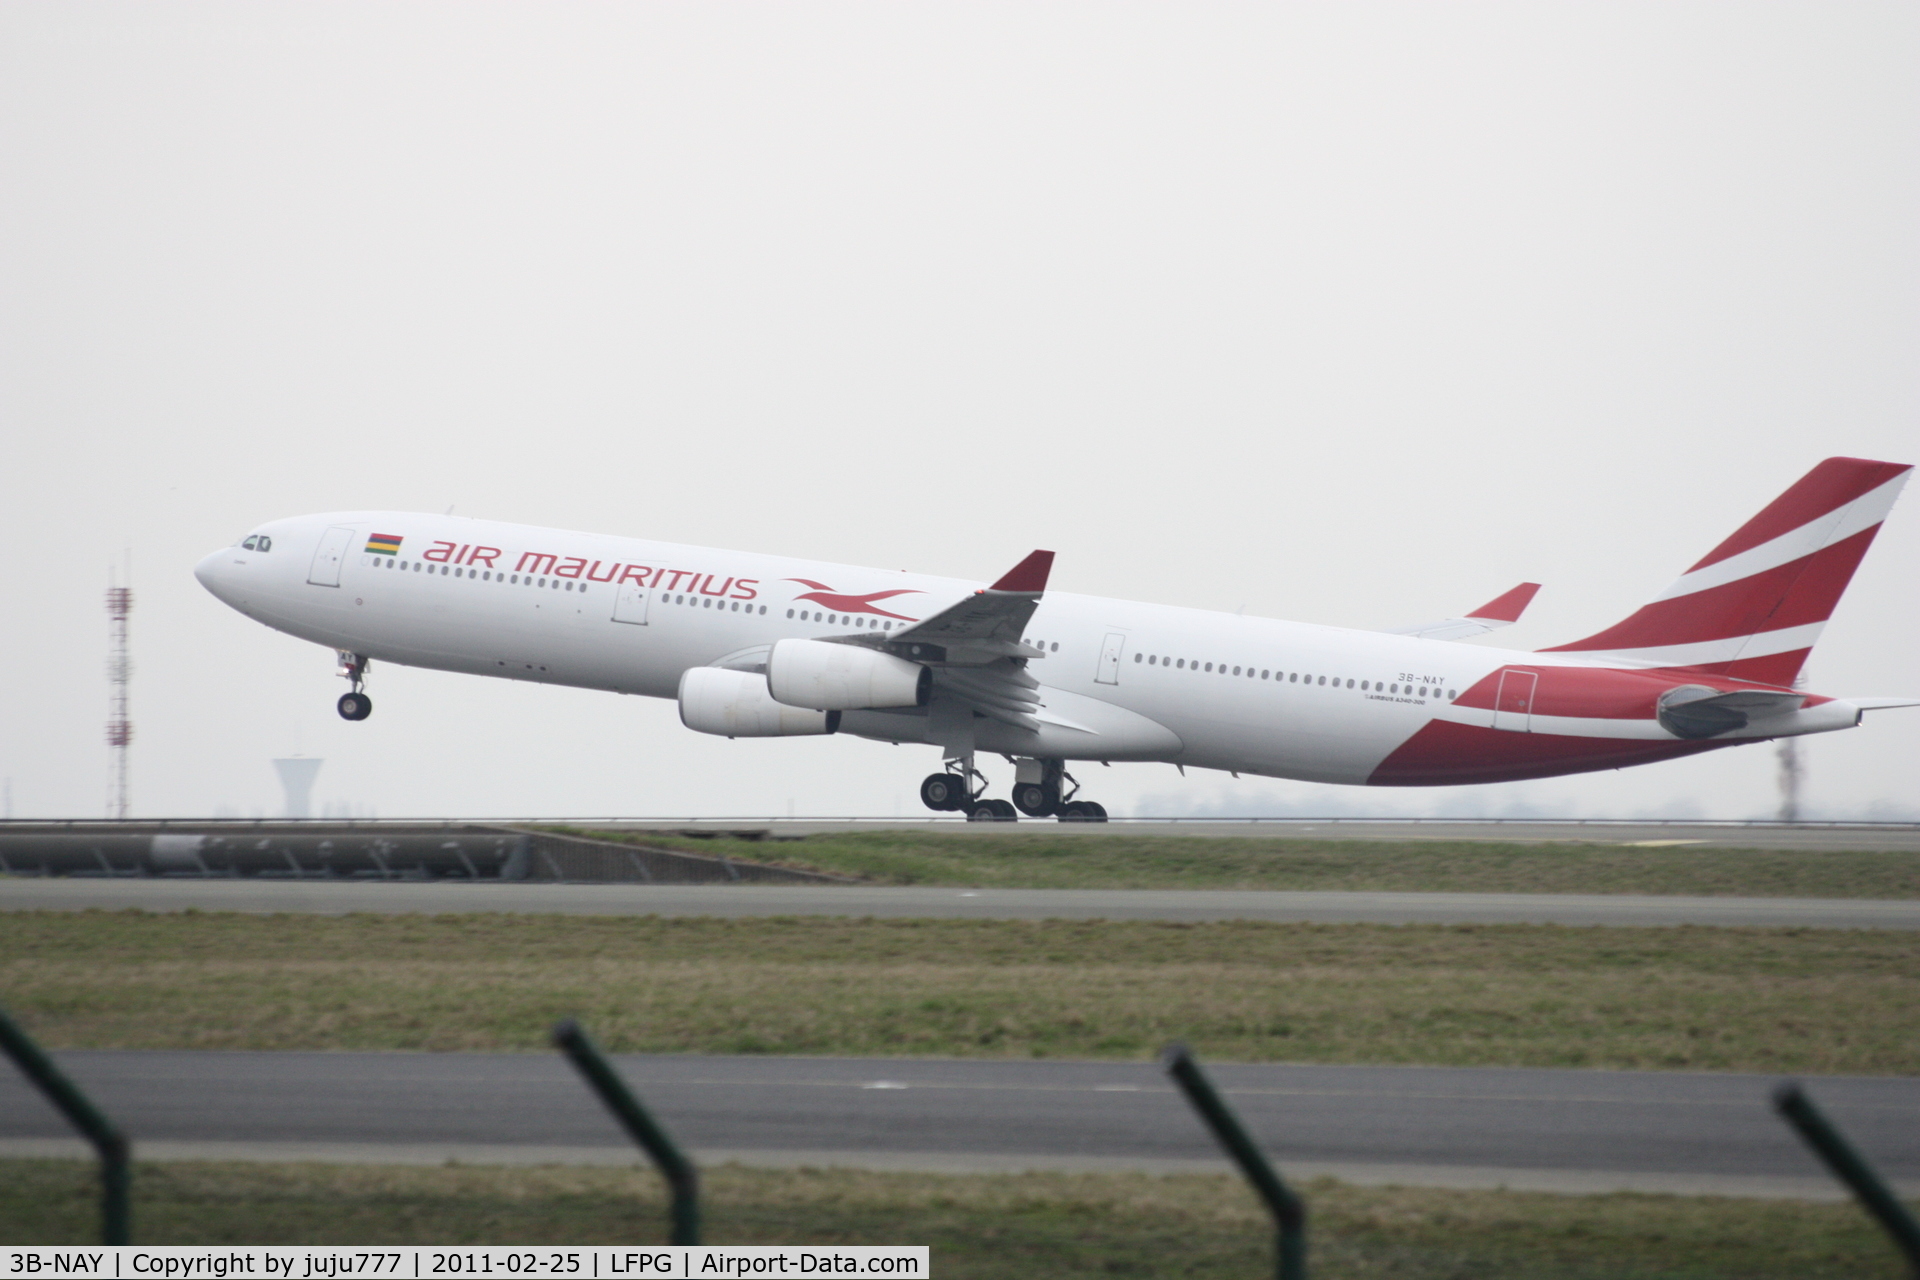 3B-NAY, 1996 Airbus A340-313 C/N 152, with new sheme